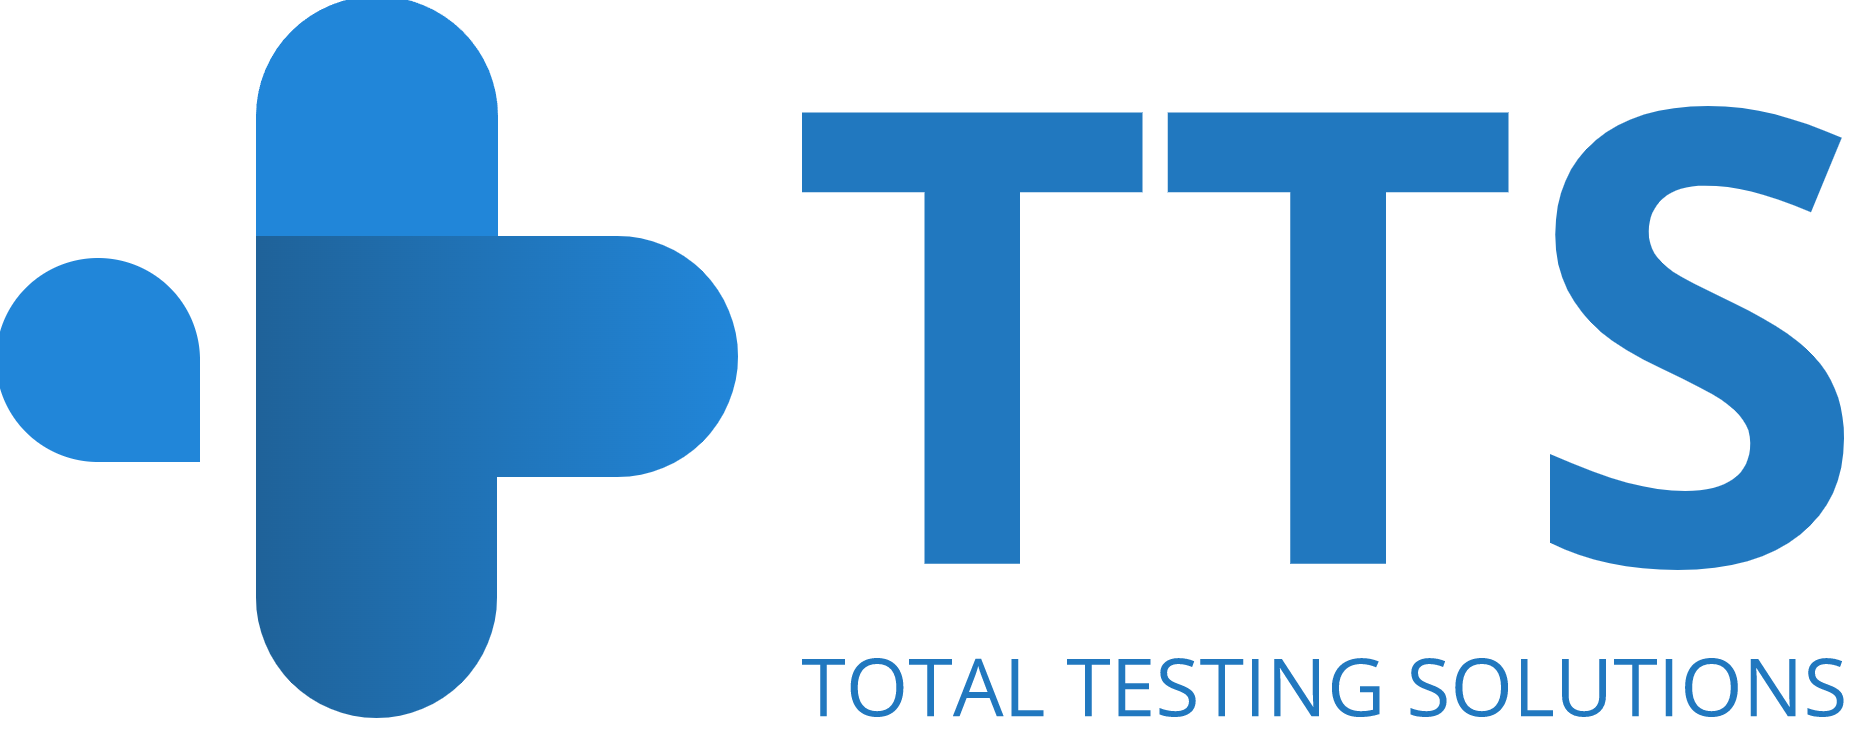 Logo of Total Testing Solutions's COVID testing division